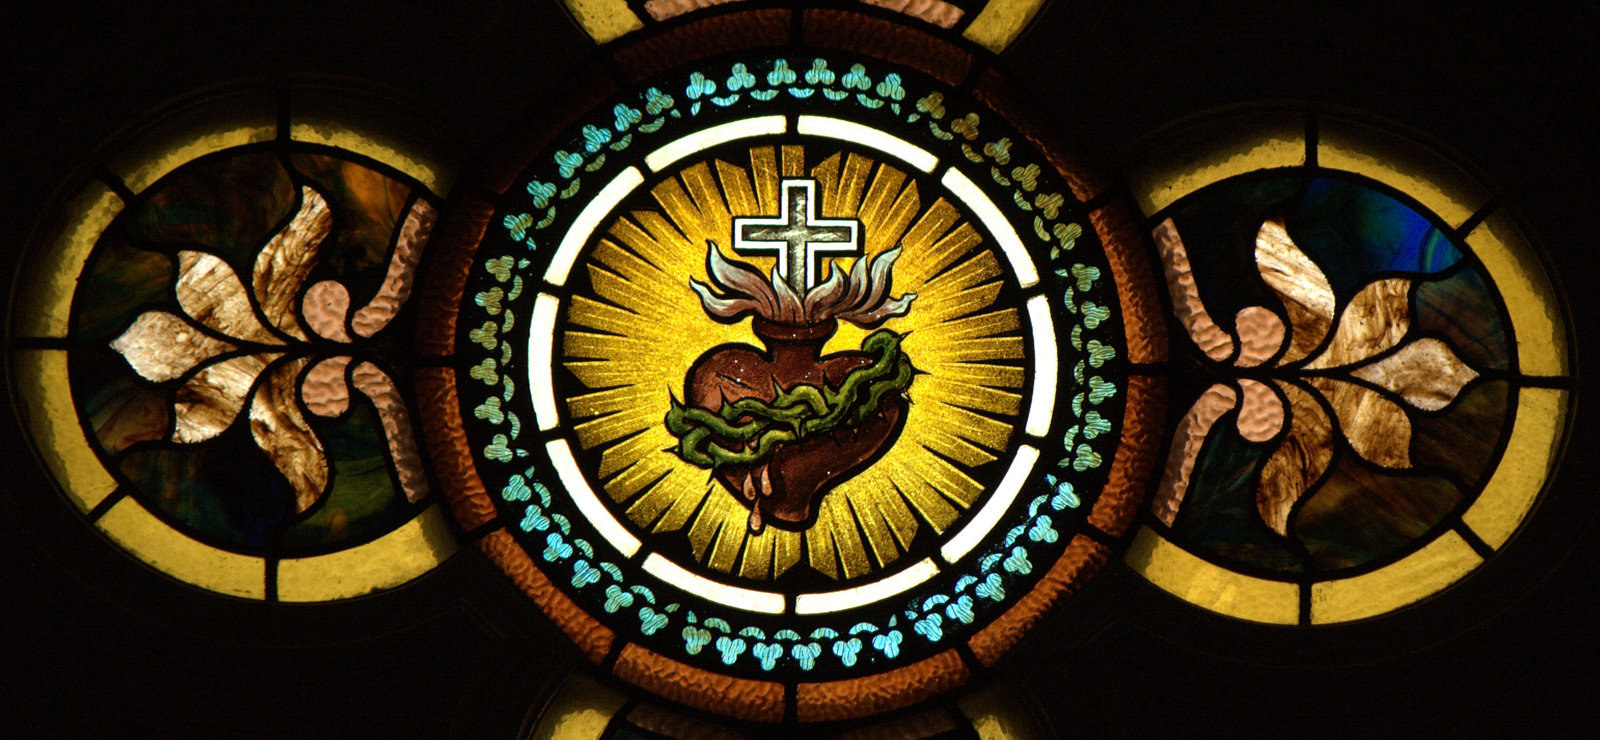 Cross Tipped Churches: Sacred Heart of Jesus (Stained Glass)